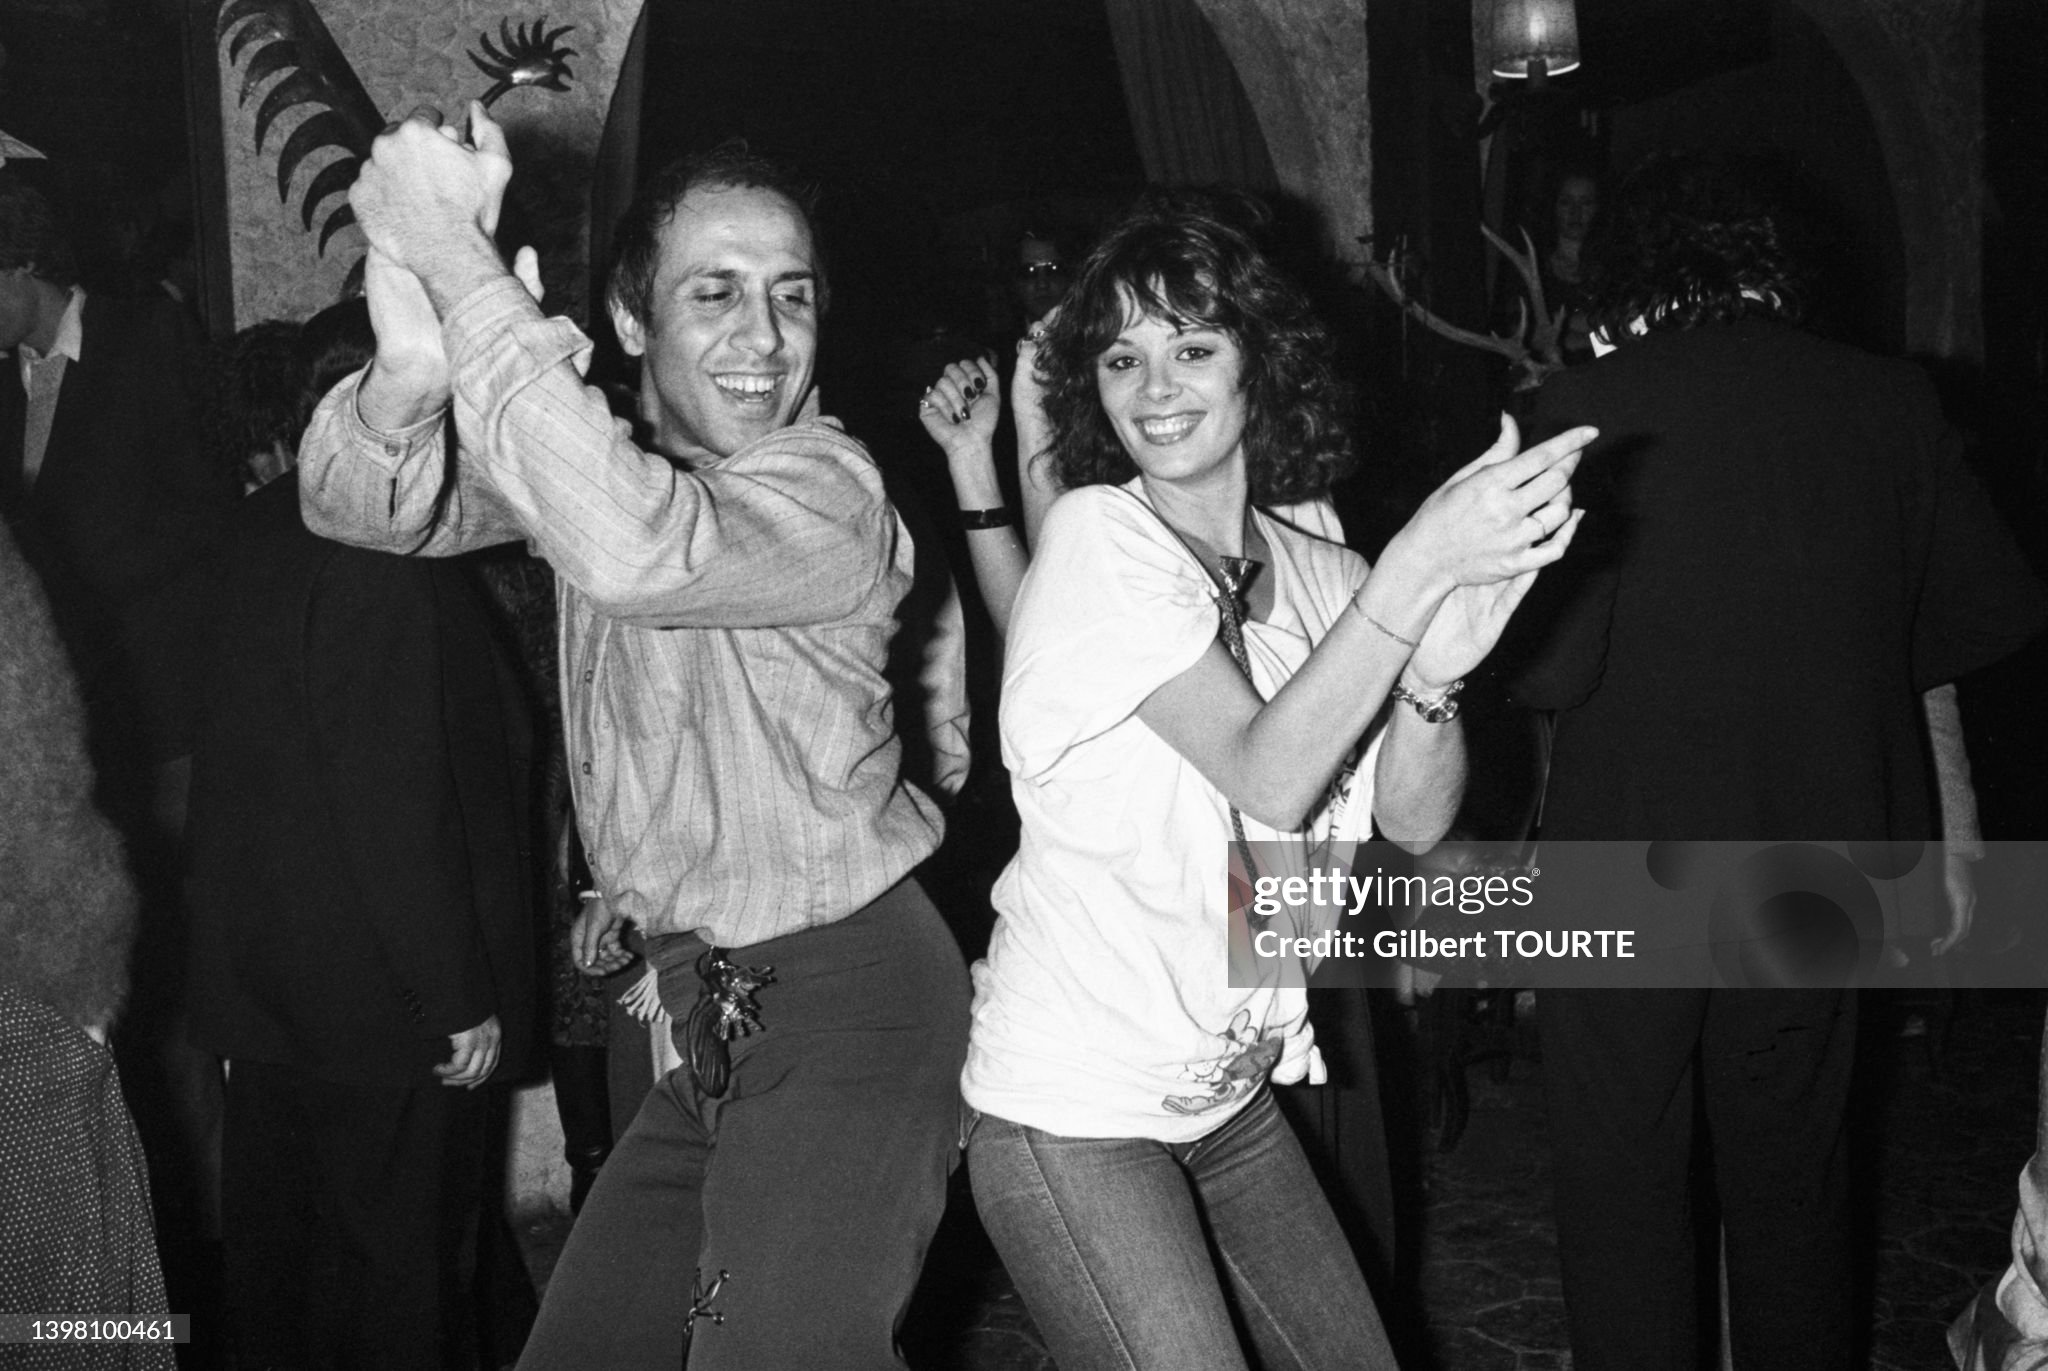 Adriano Celentano dancing at Midem in Cannes, France, in January 1979. 